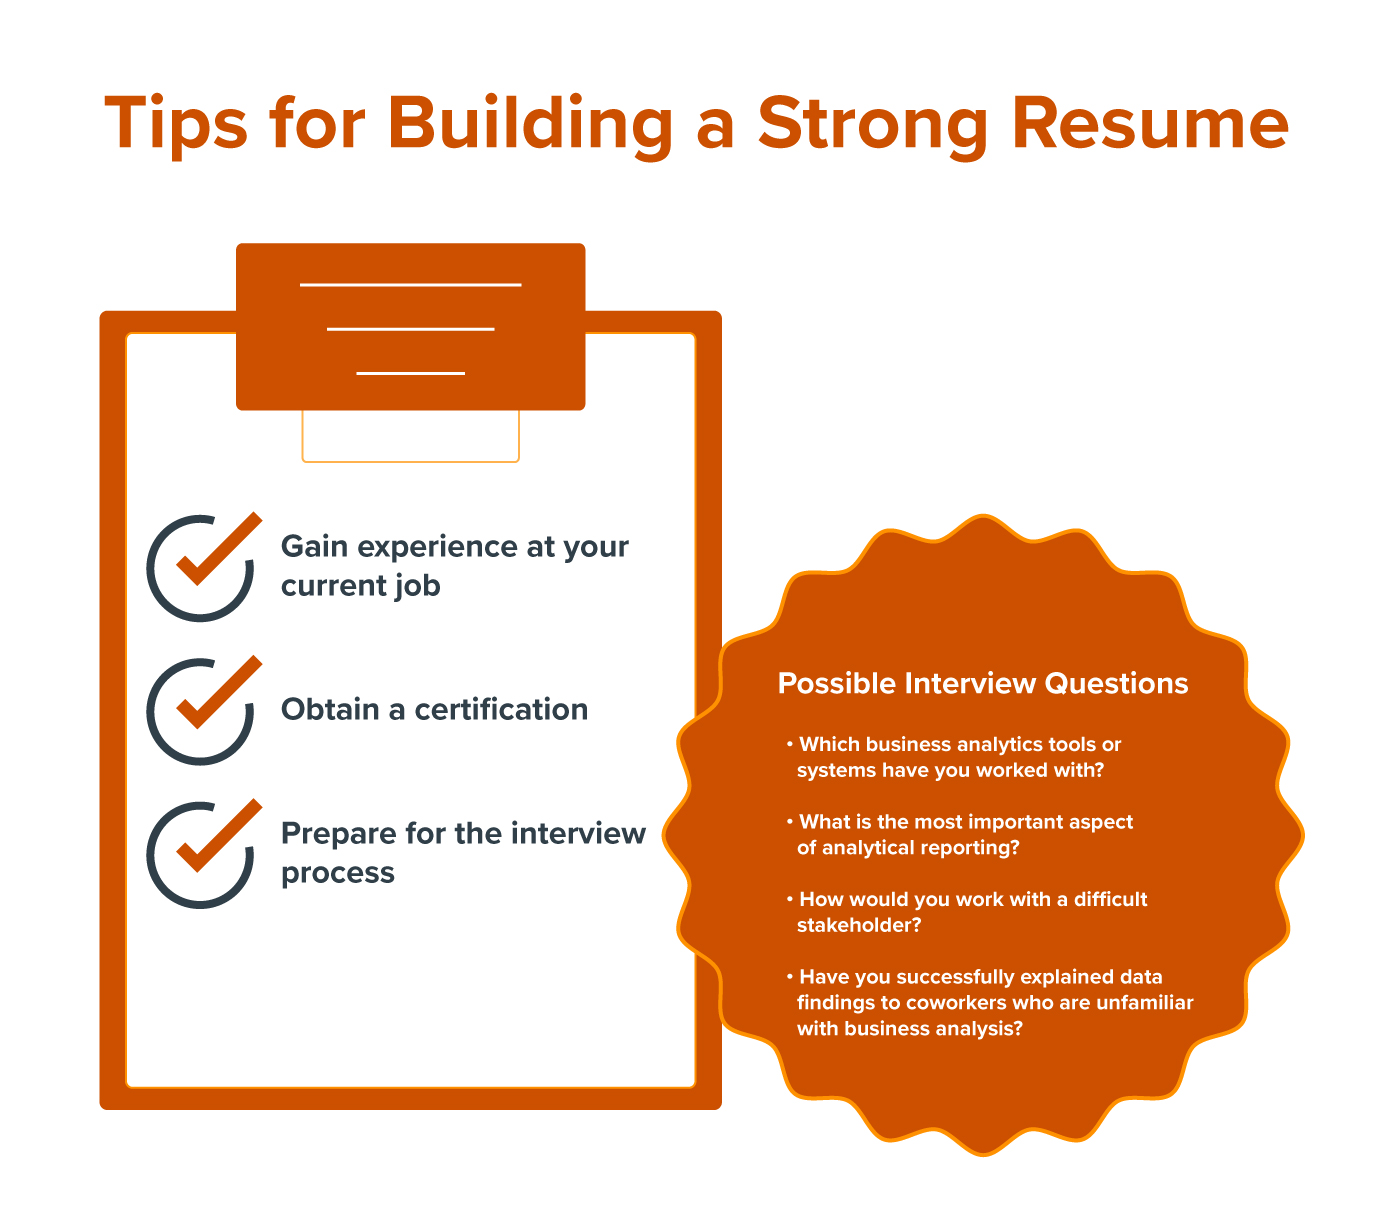 An image highlighting tips for building a strong resume, as mentioned in the article.